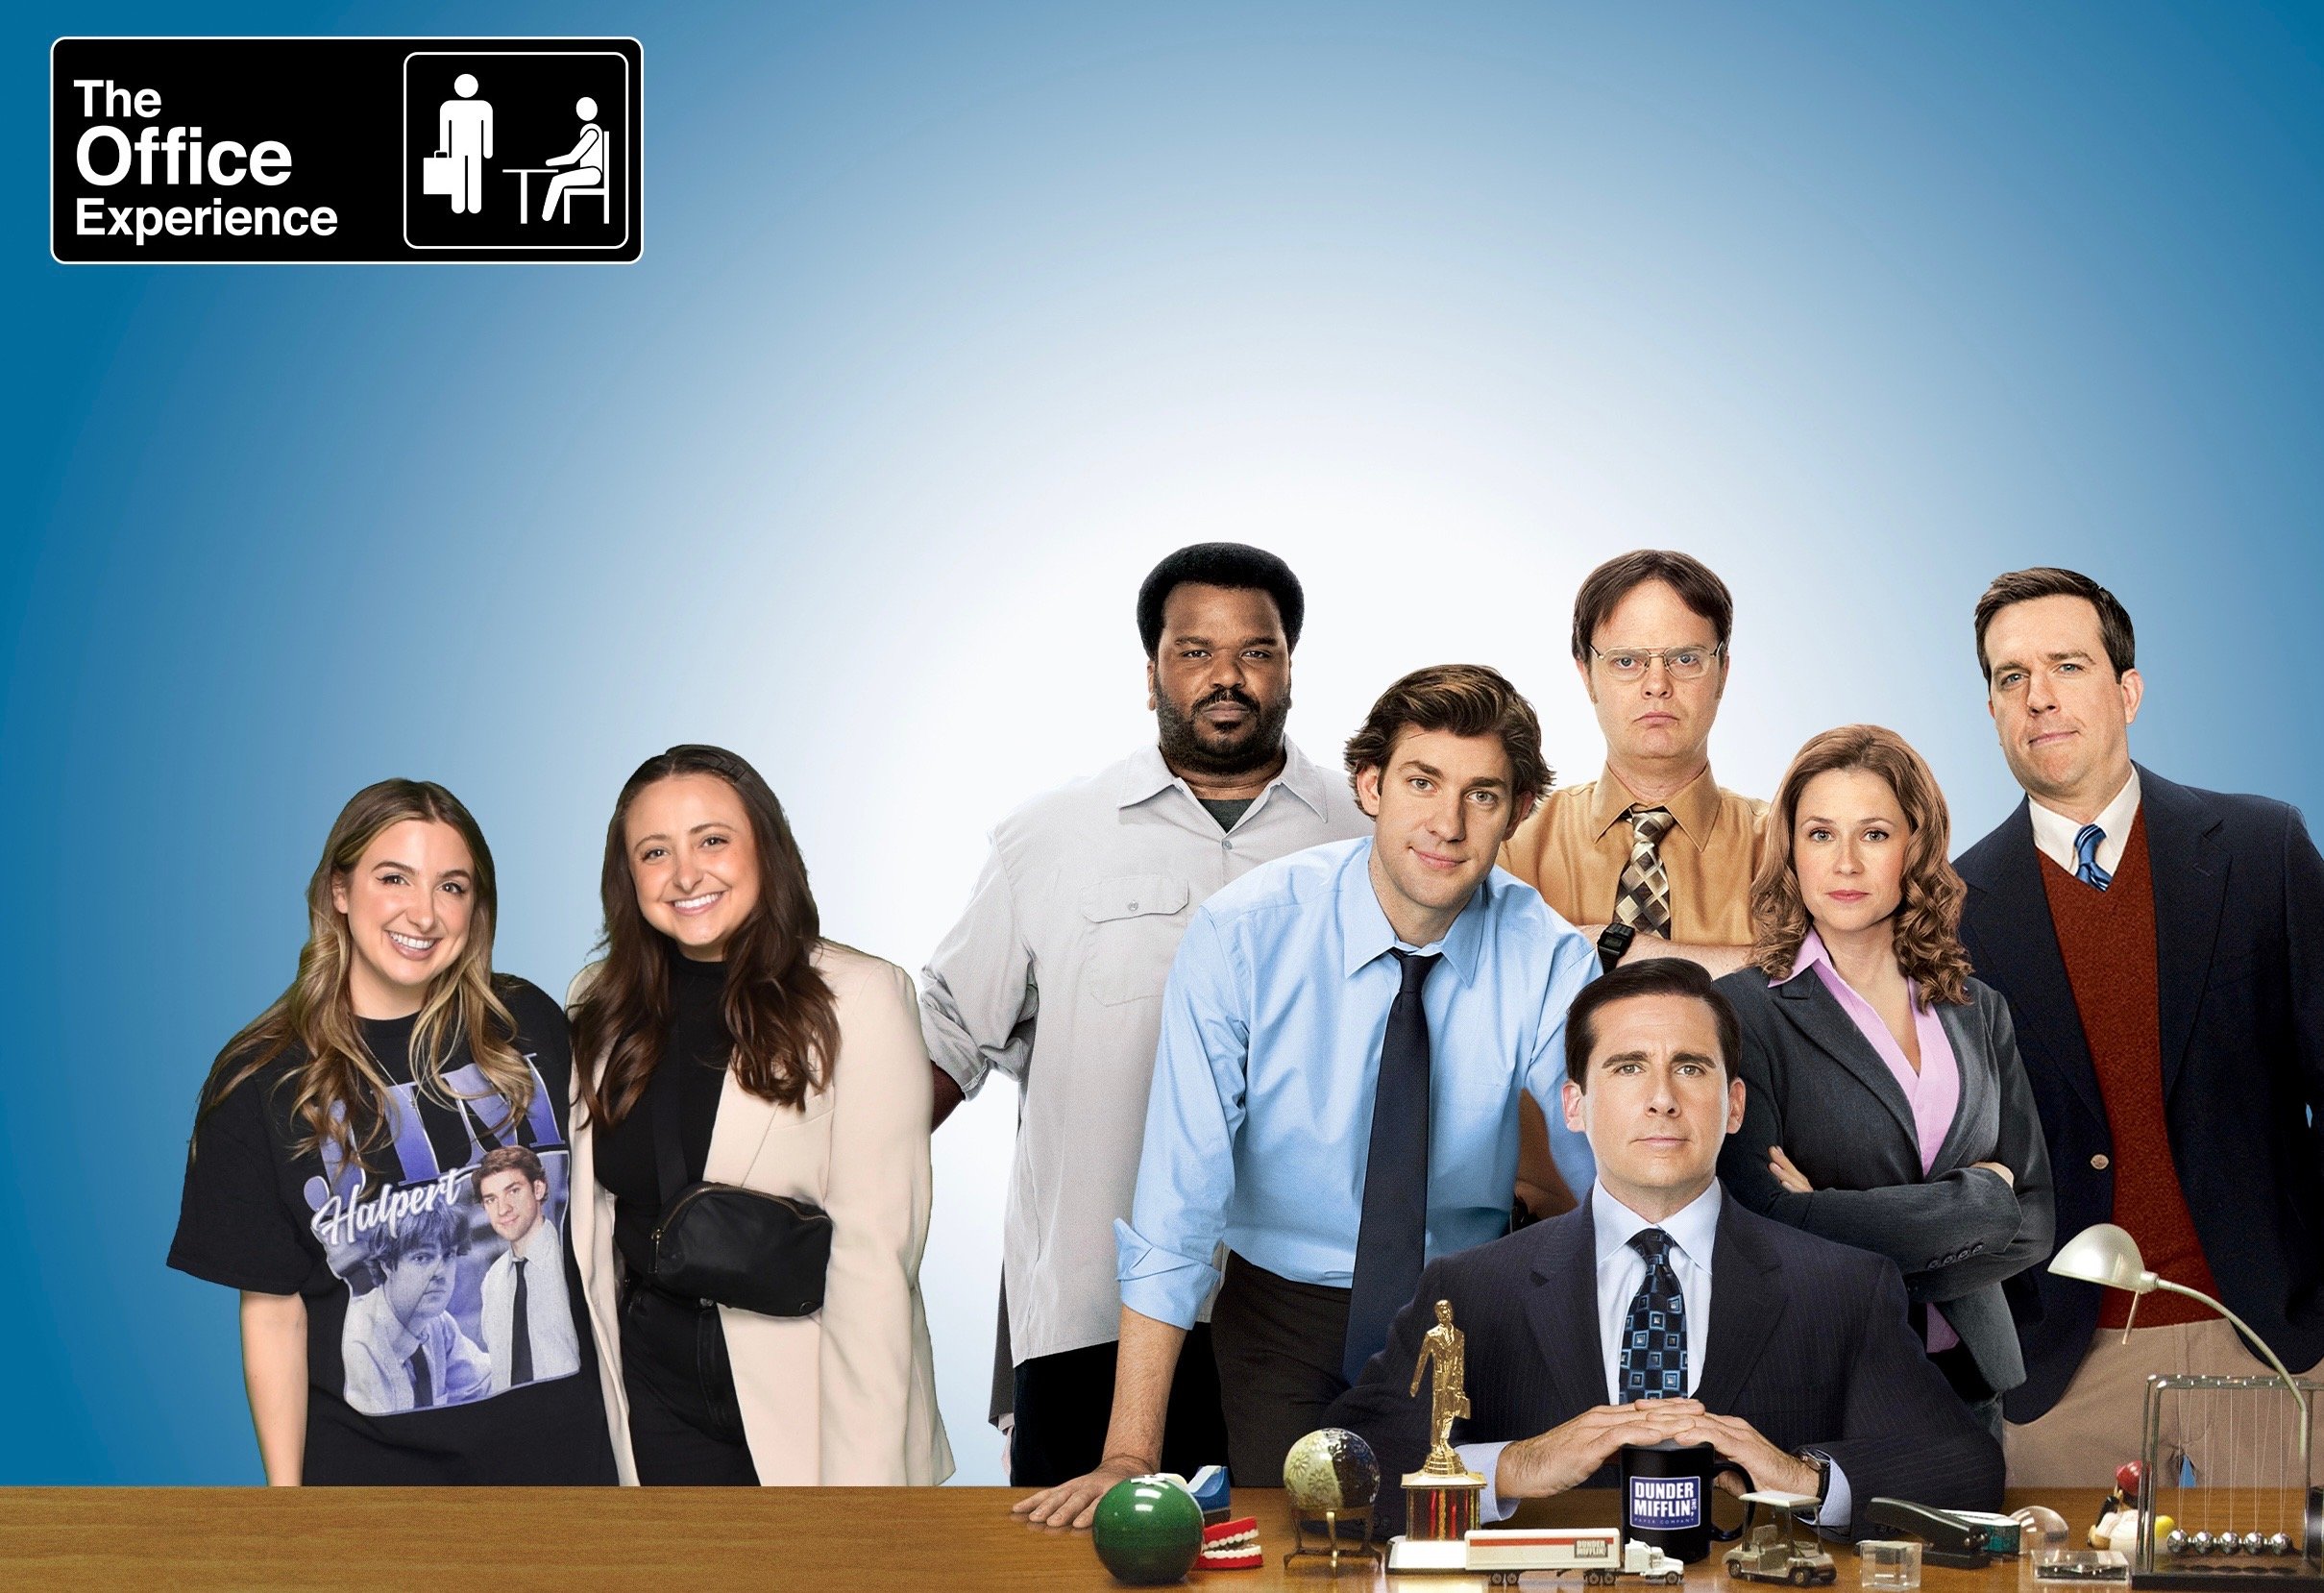 The Office Experience makes Canadian debut in Toronto